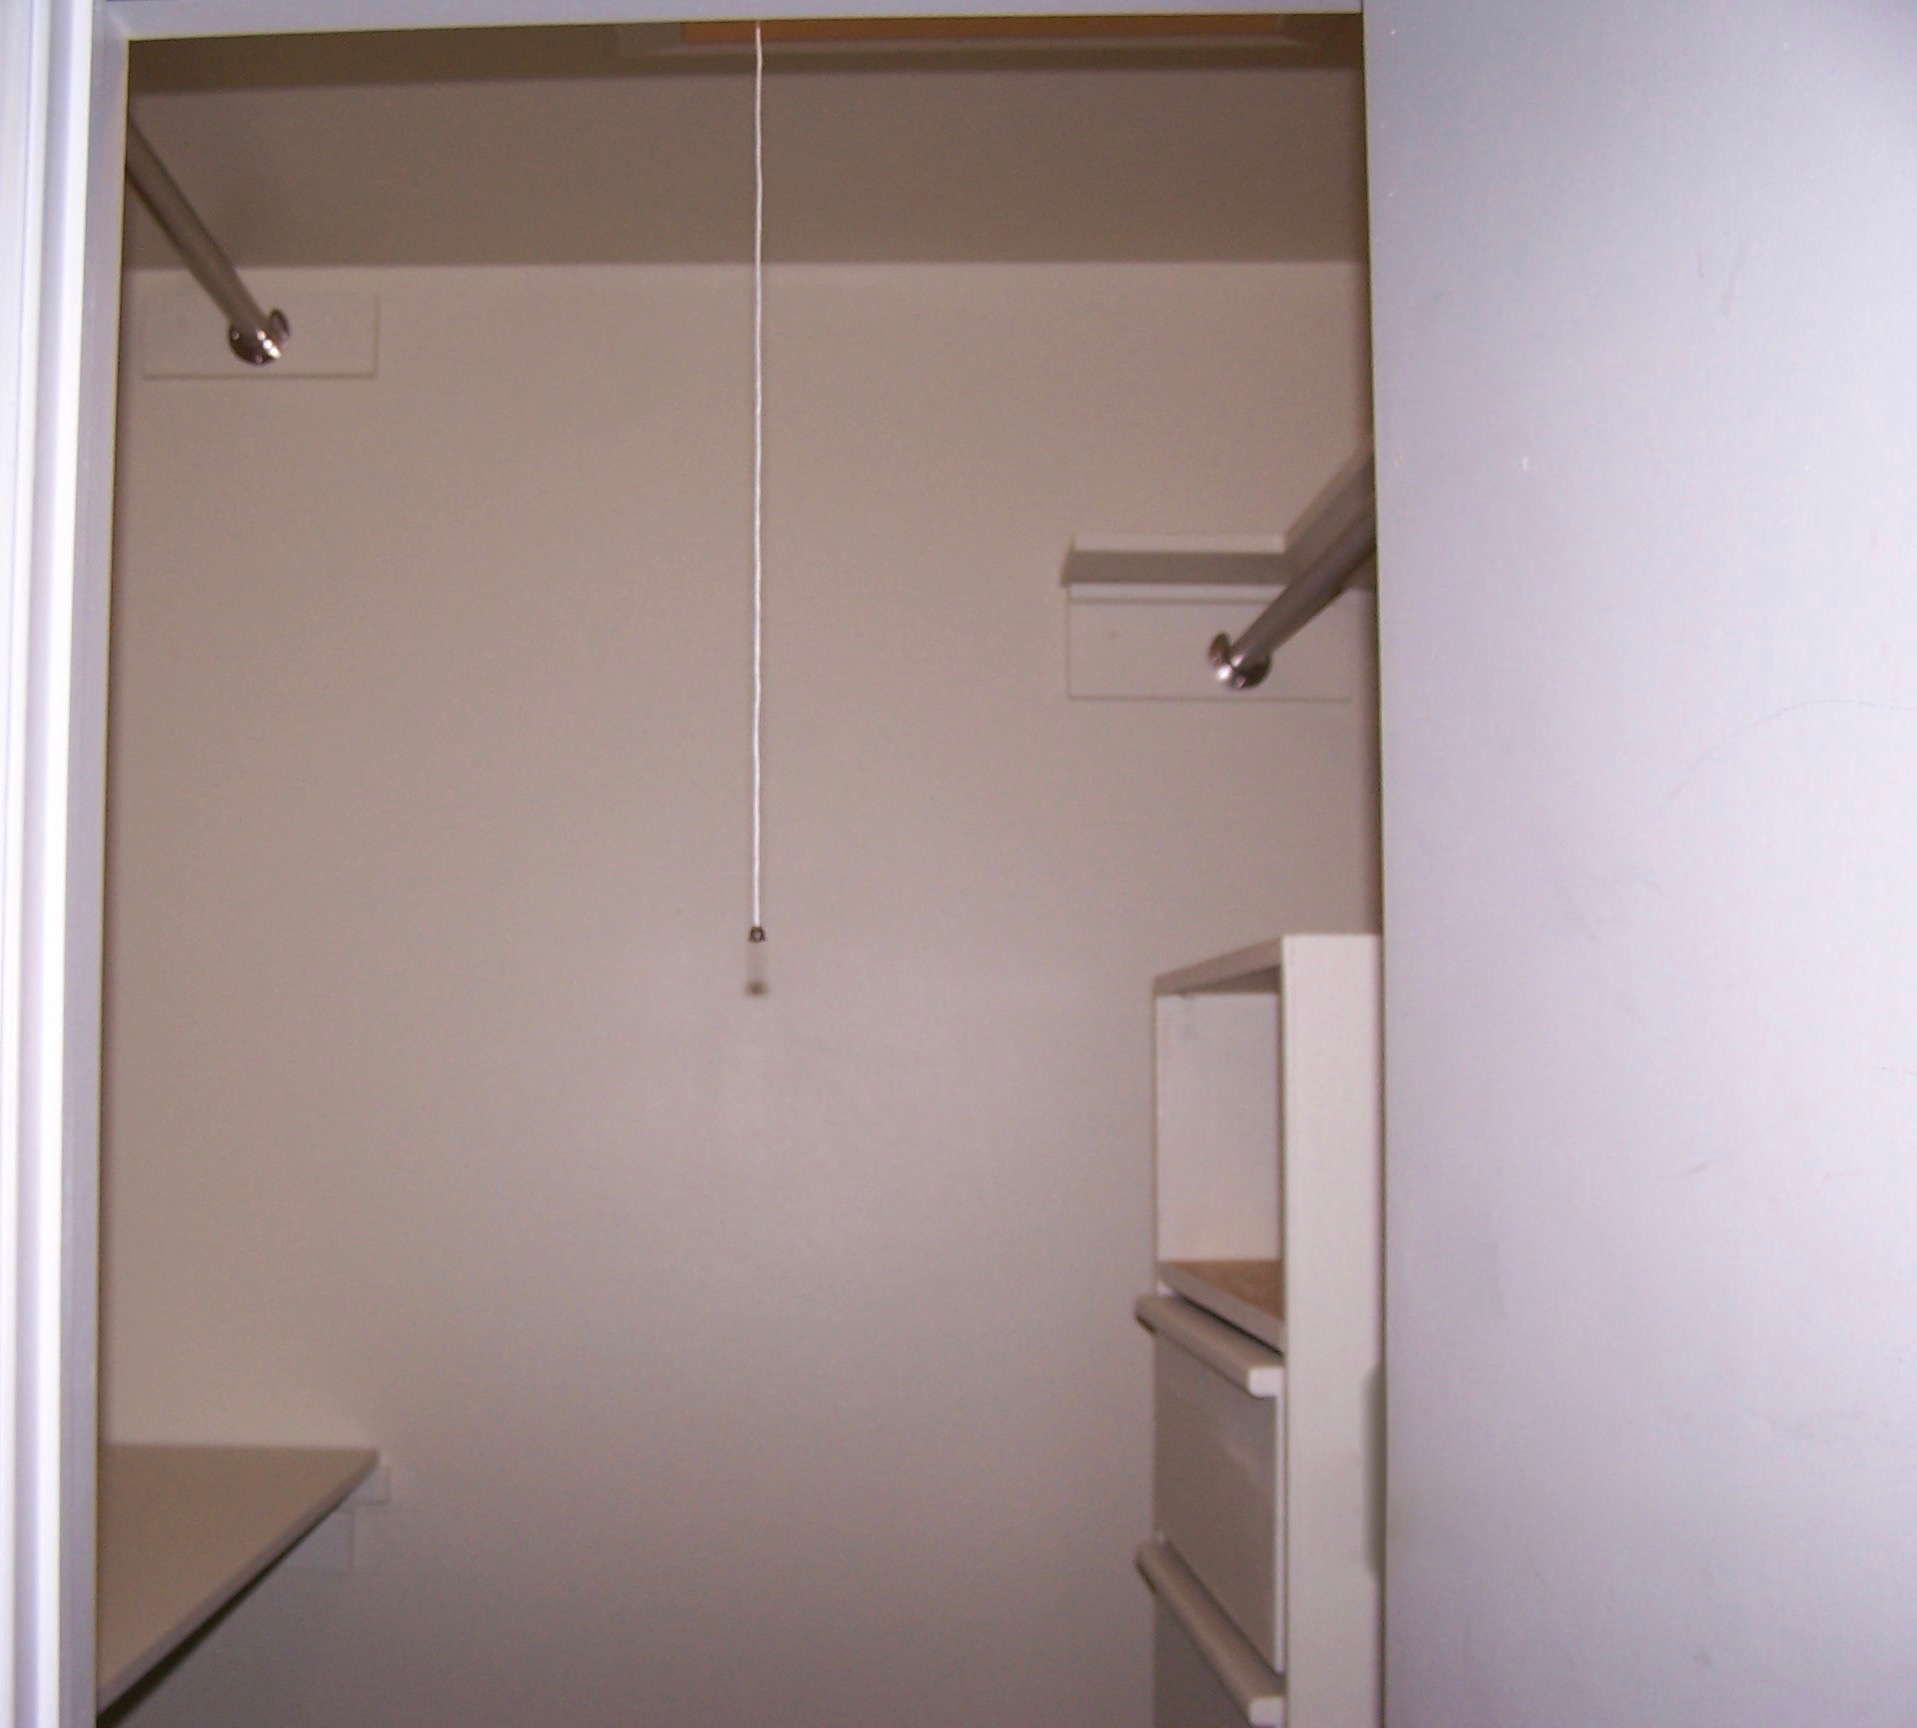 View of the hanging wall chest, closet poles, and shelves.